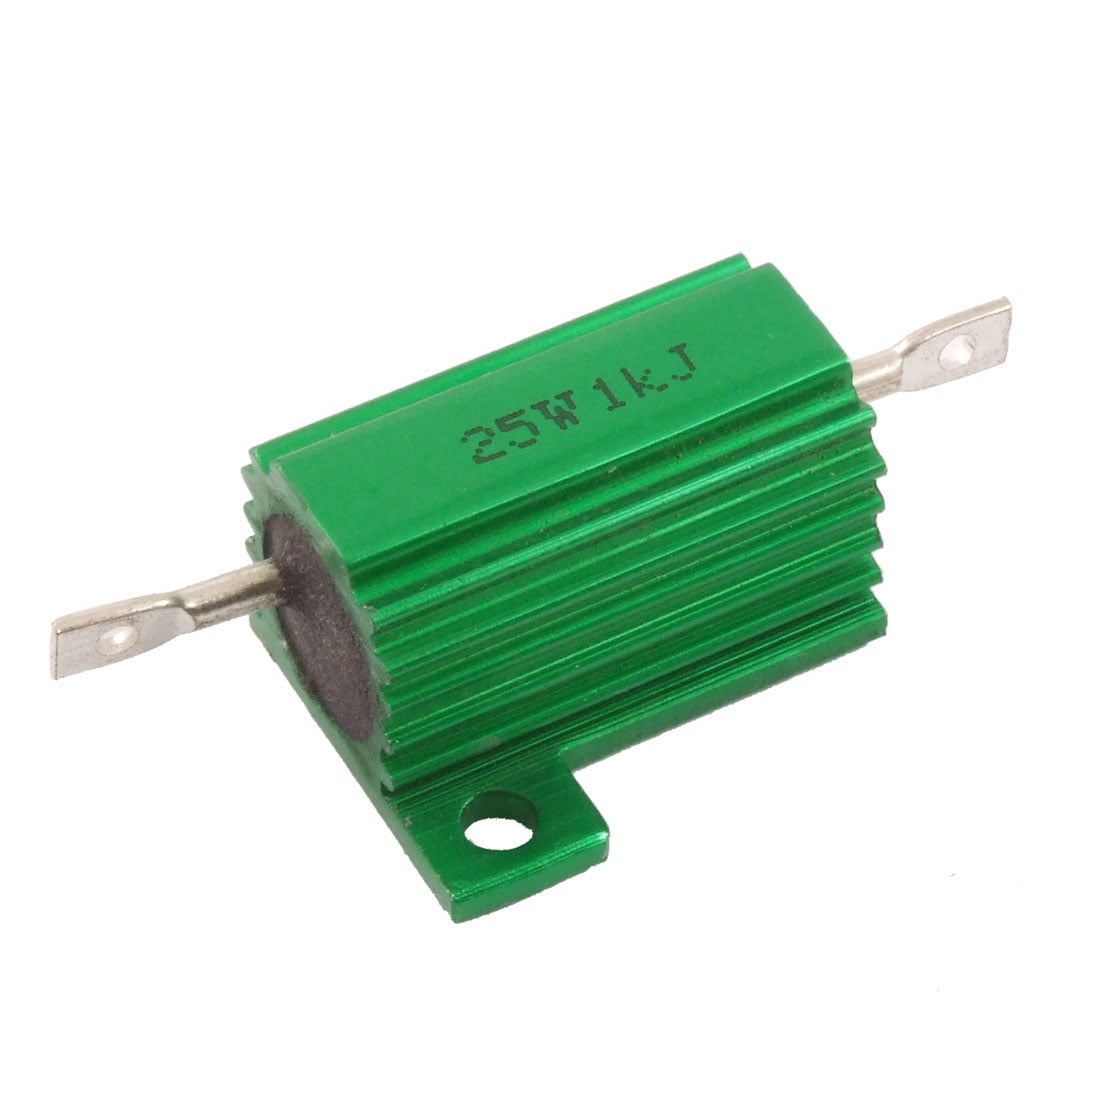 uxcell 25W 1k Ohm 5% Aluminum Housing Resistor Screw Tap Chassis Mounted Aluminum Case Wirewound Resistor Load Resistors Green 1 pcs 